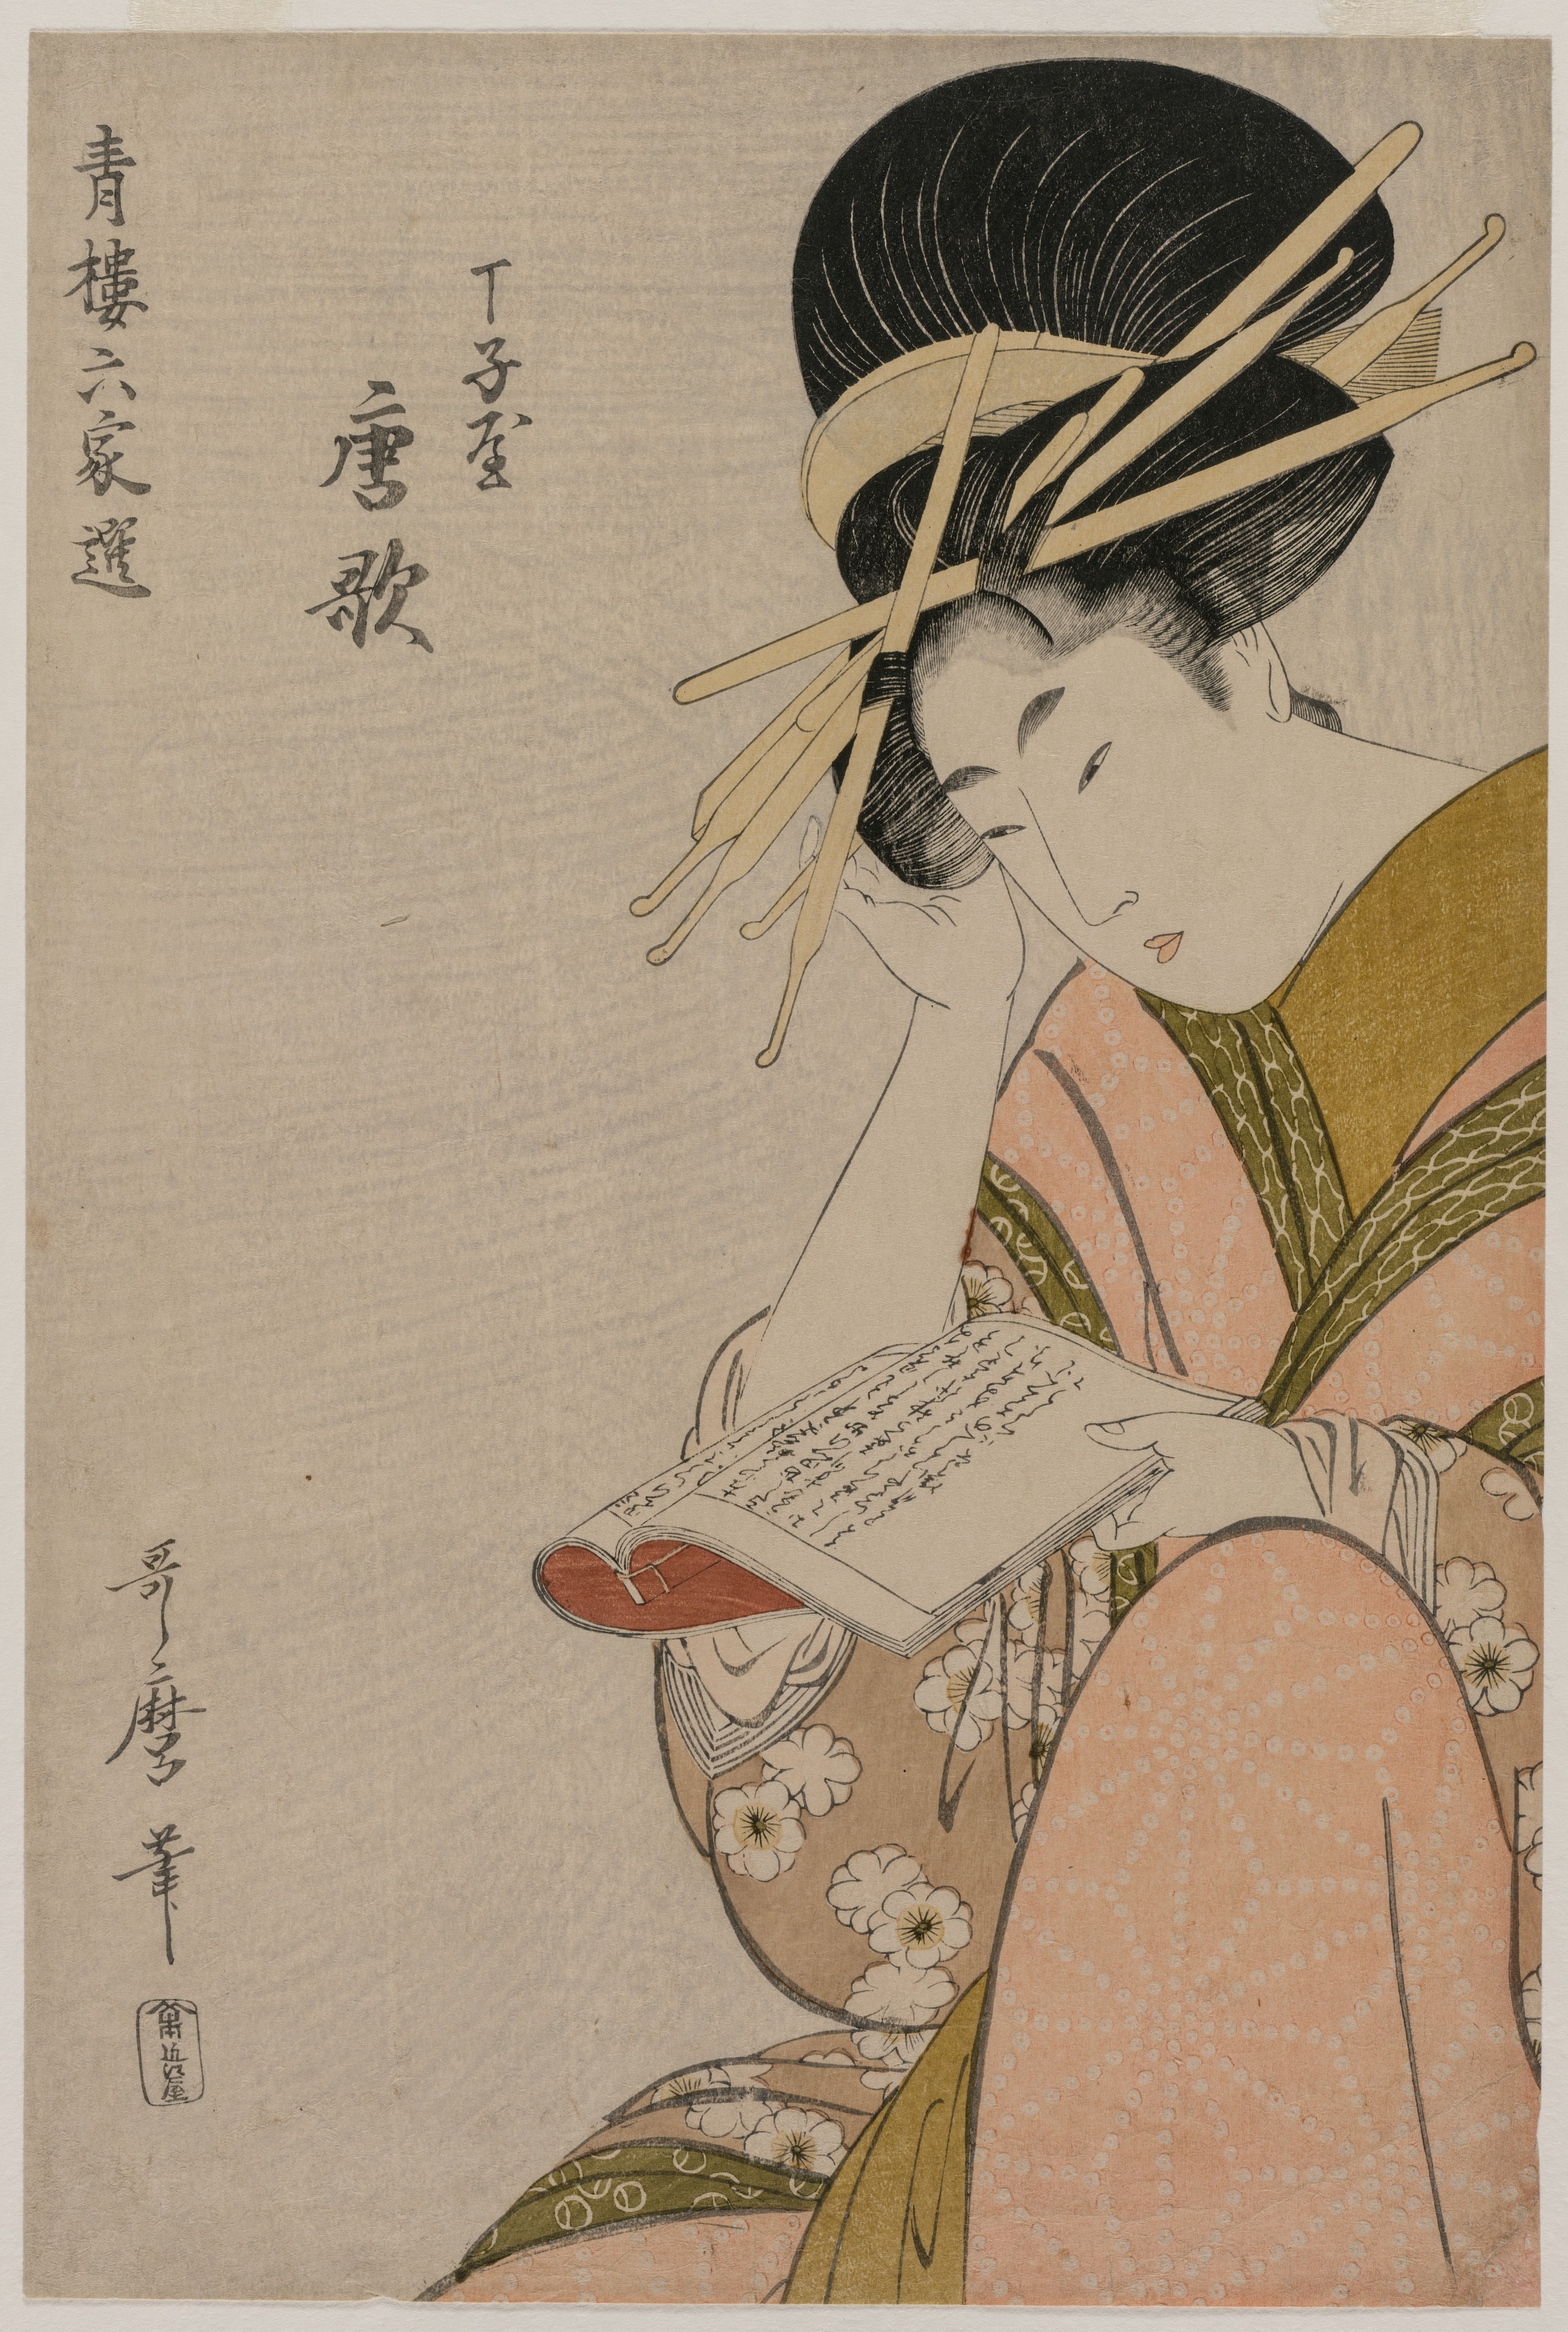 The Courtesan Karauta of Chojiya Reading a Book (from the series Six Authors of the Green Houses)